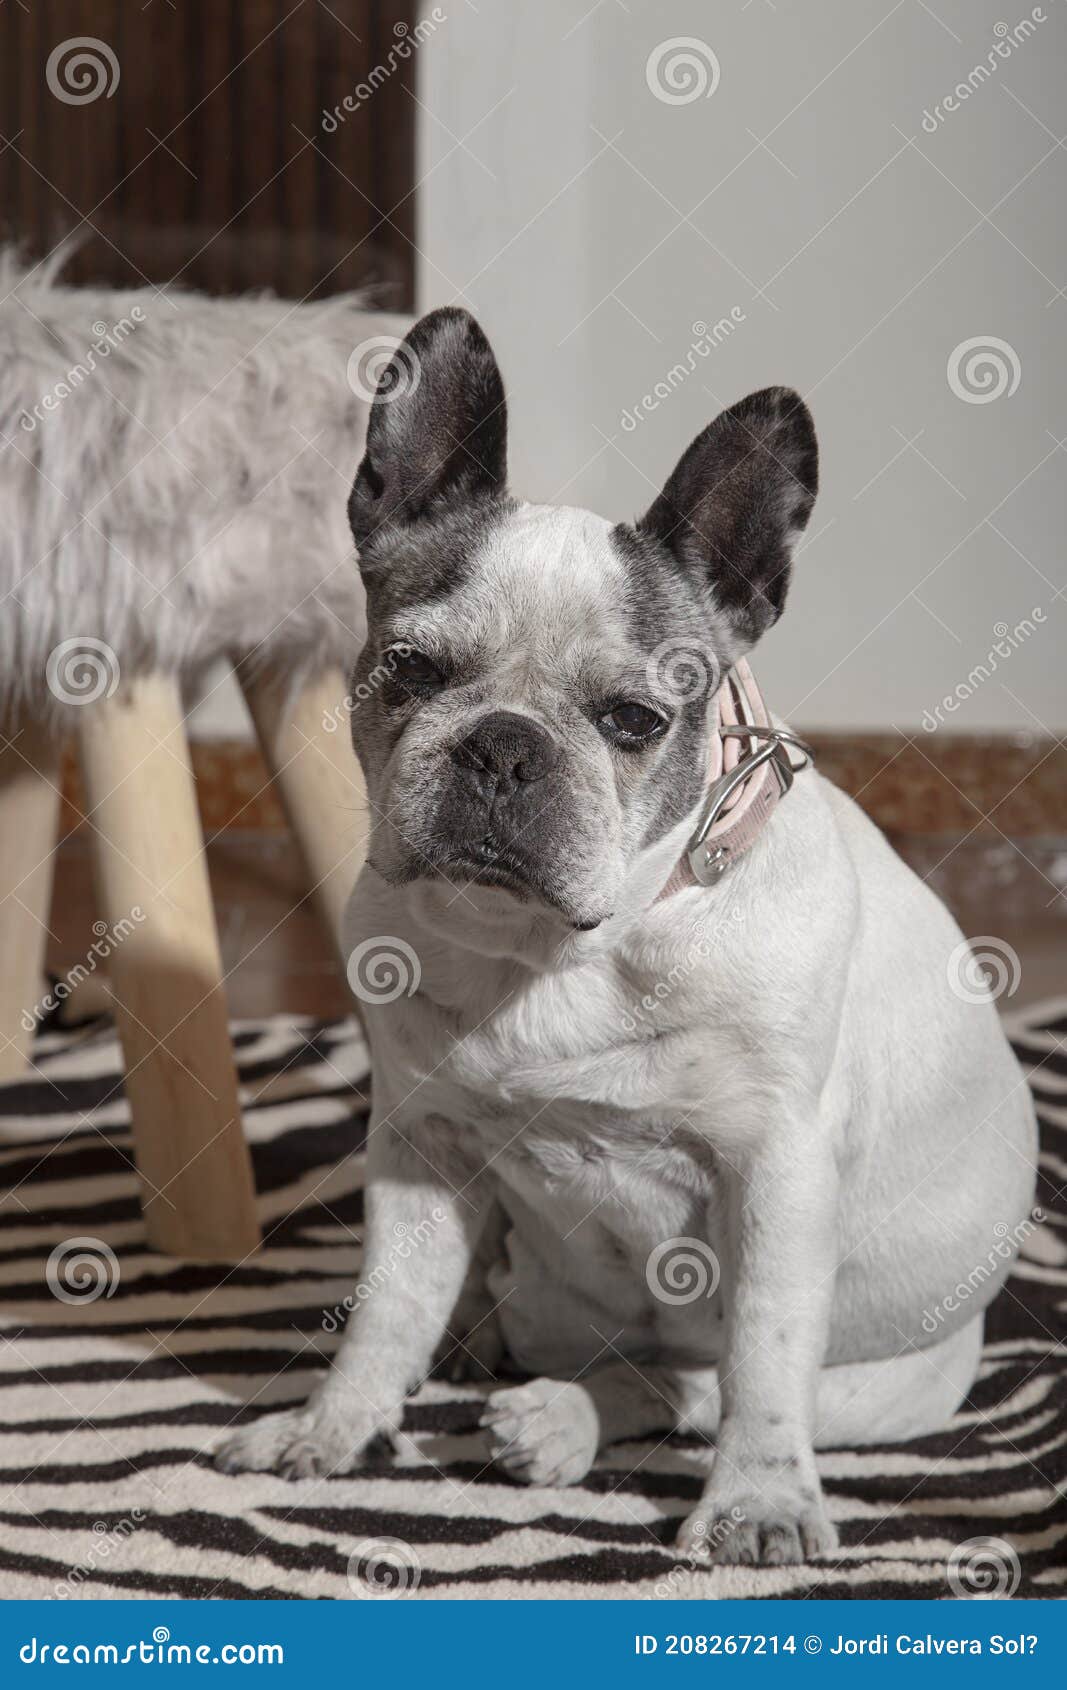 old french bulldog sitting on the zebra rug on the floor.vertical picture